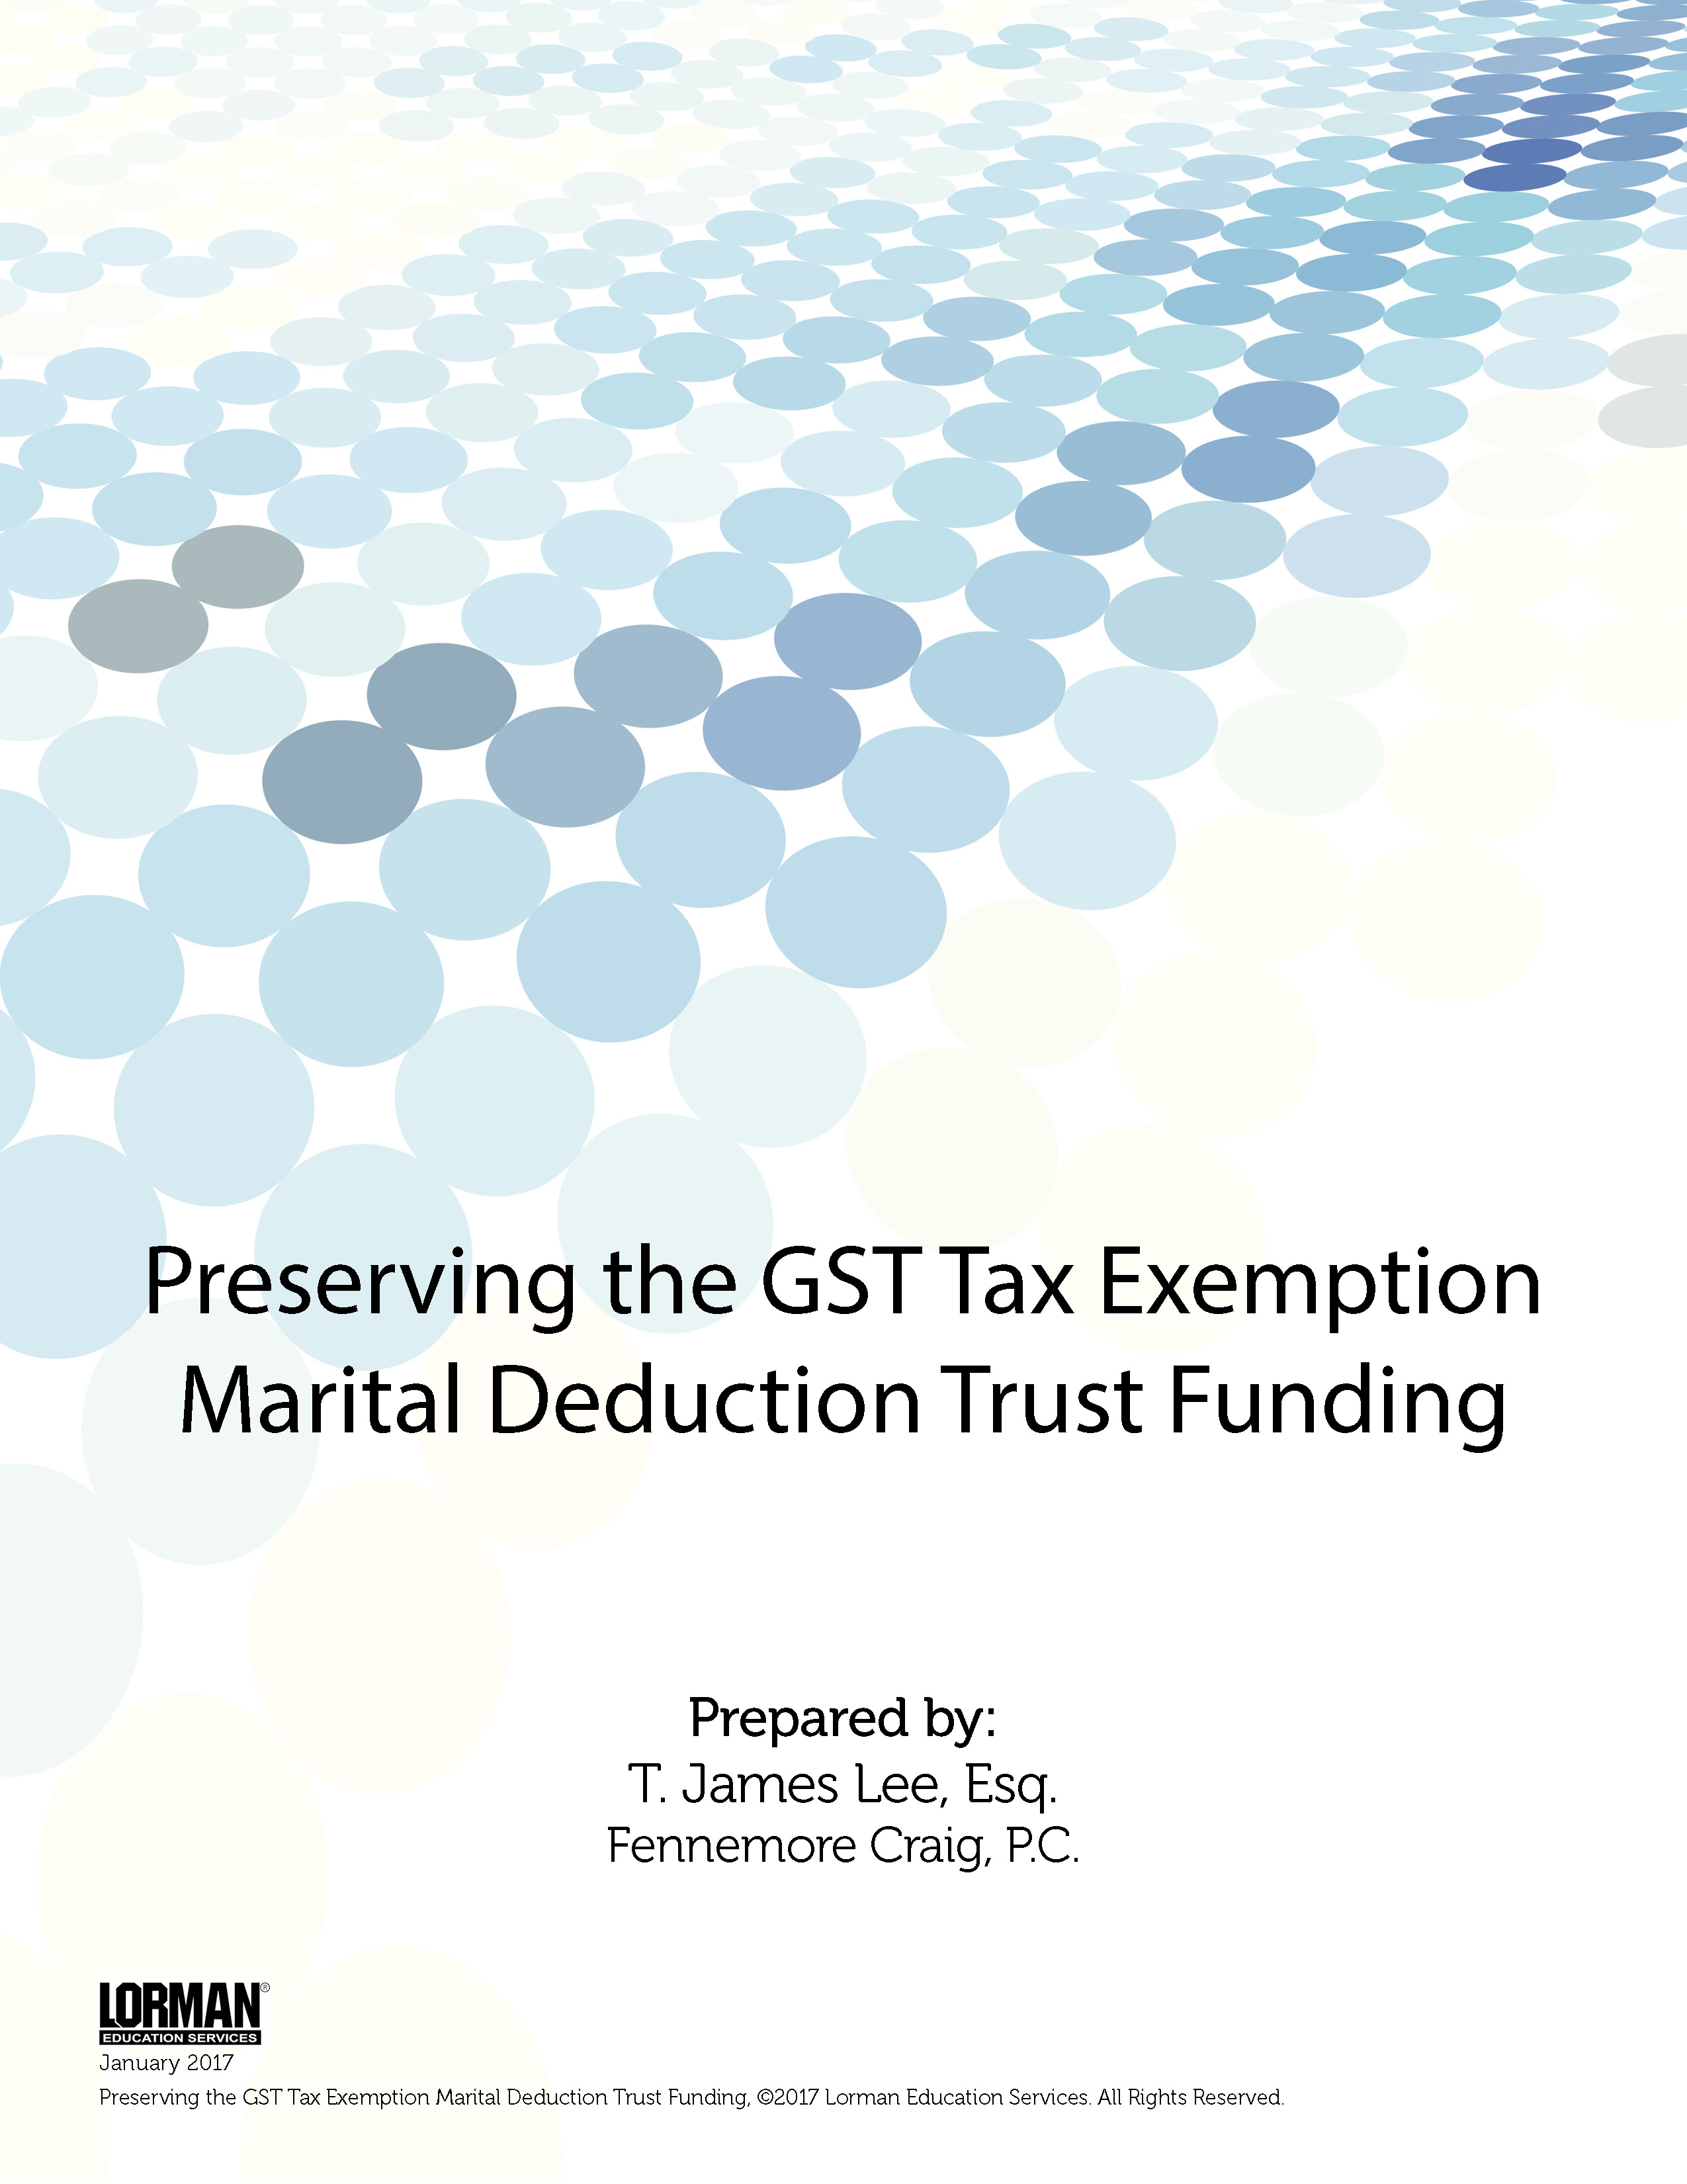 Preserving the GST Tax Exemption Marital Deduction Trust Funding